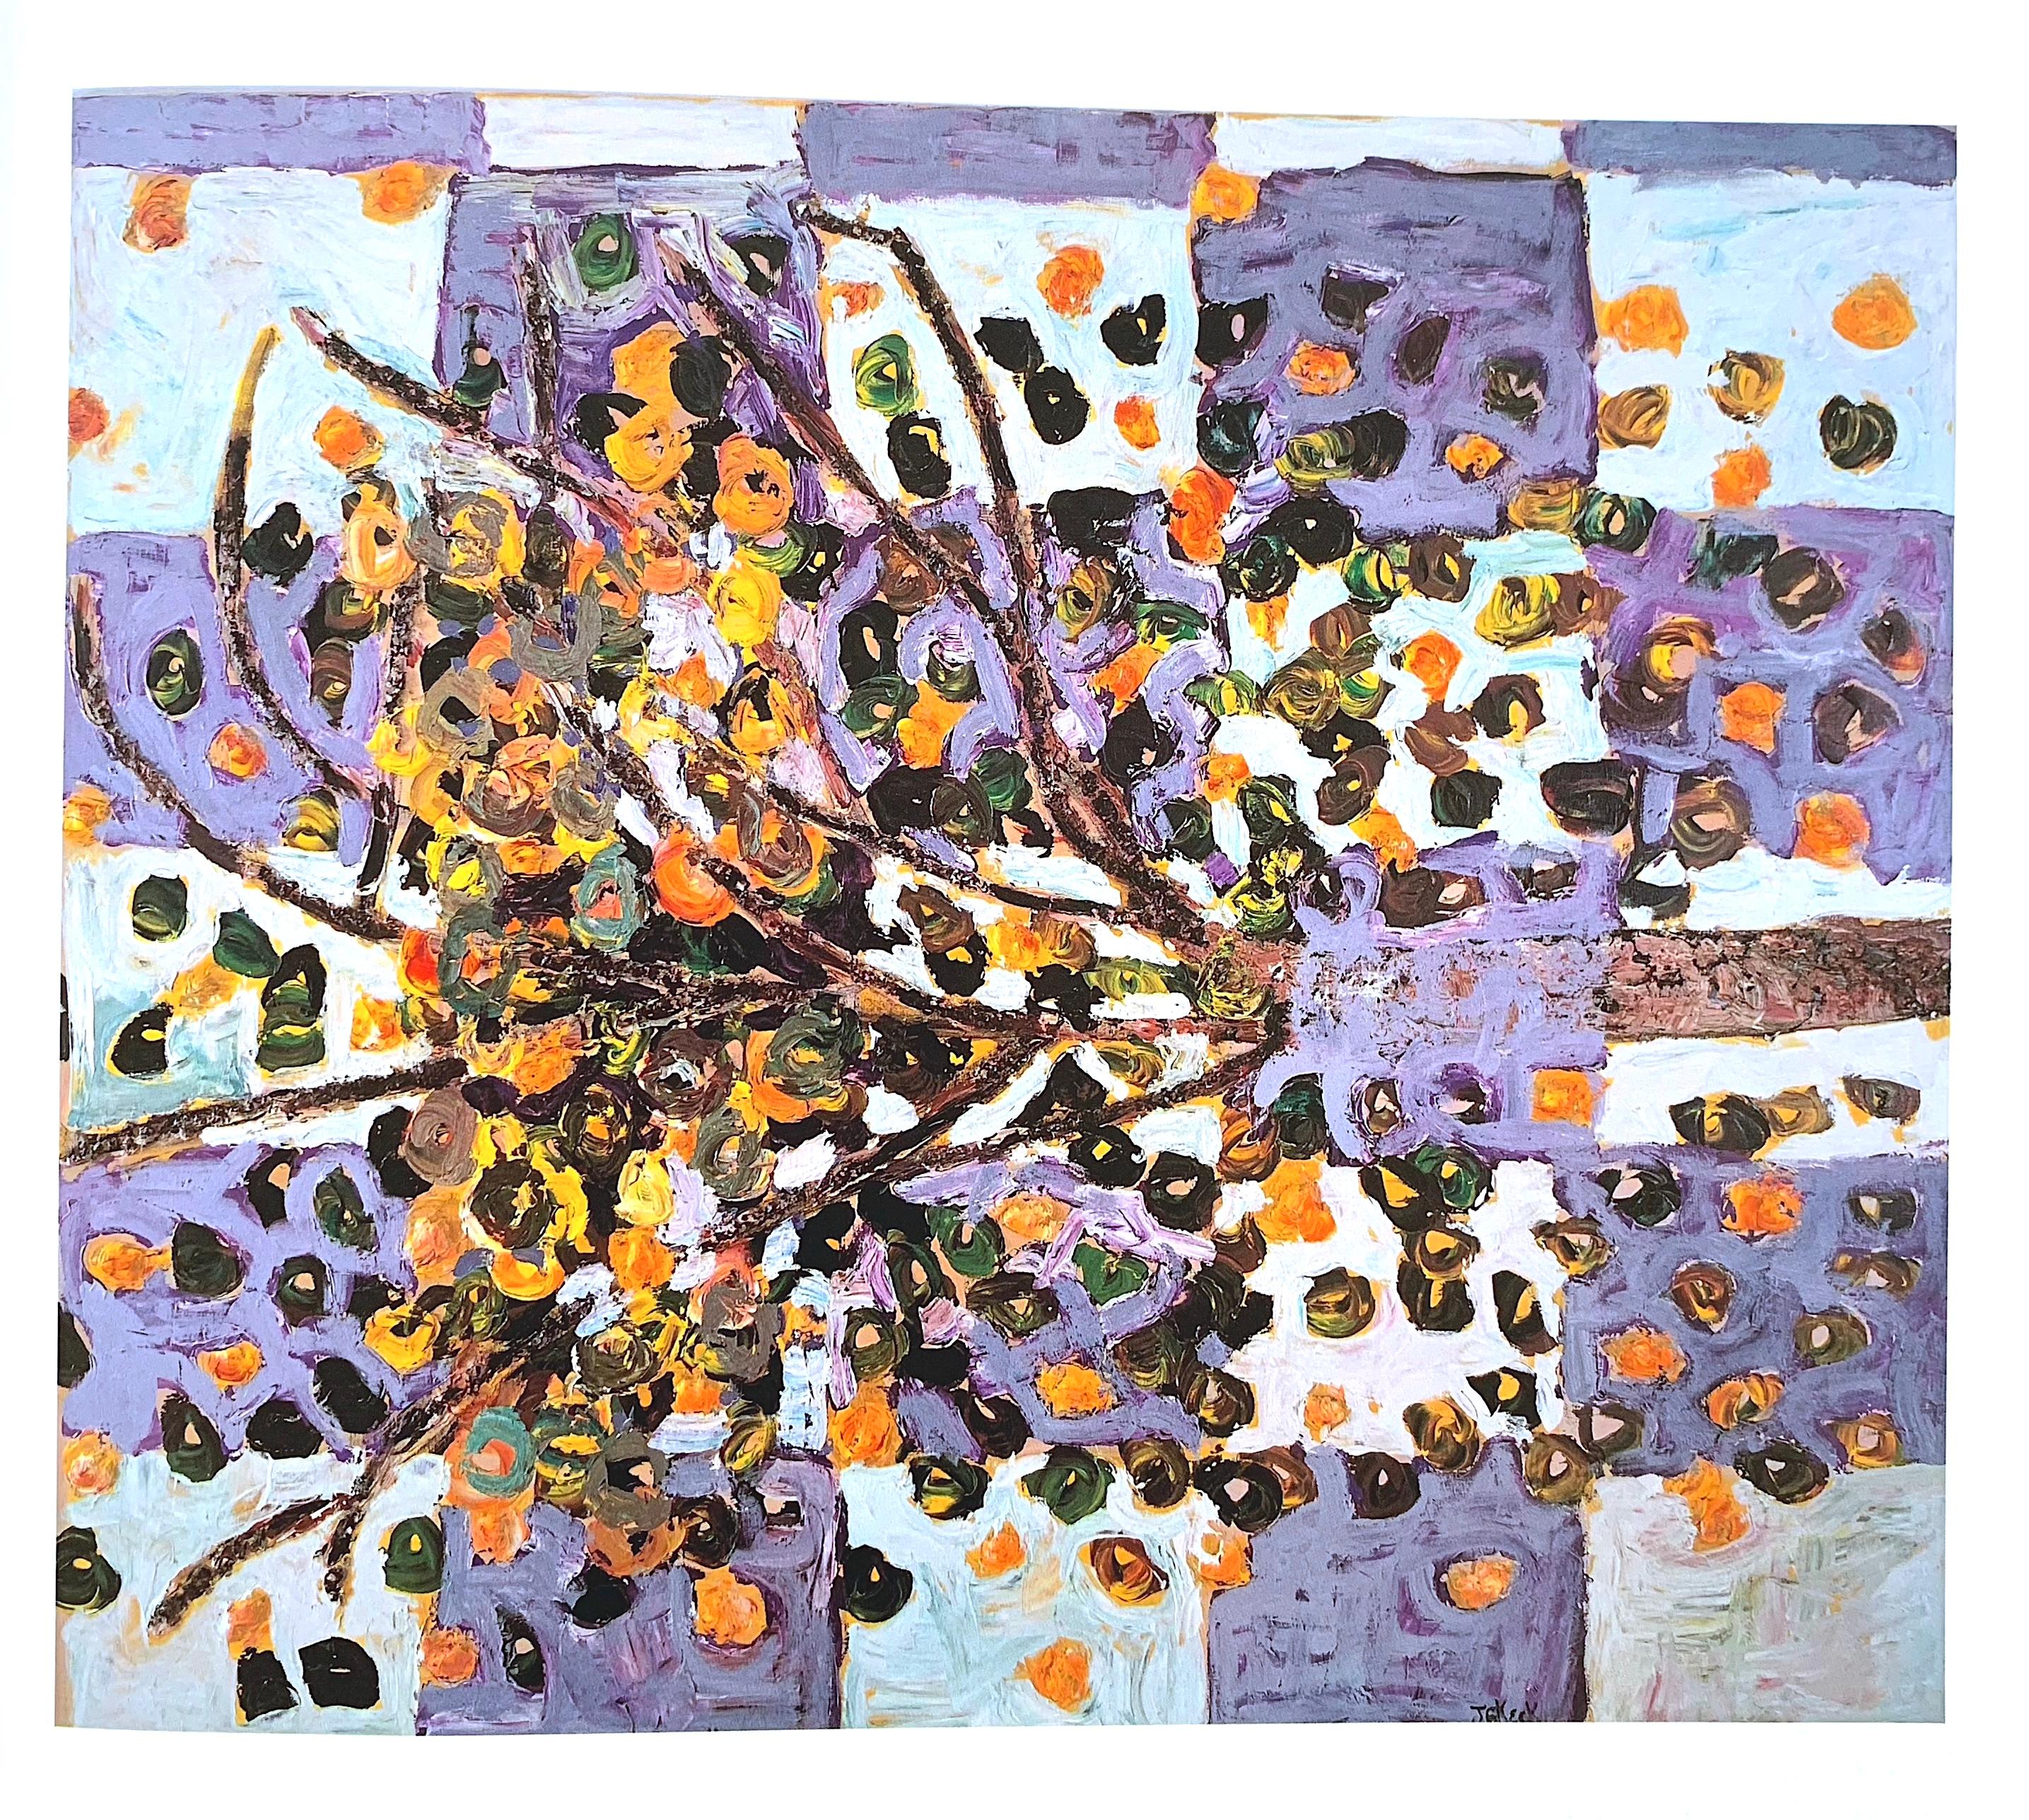 Jeanne Gentry Keck, Persimmon and Perception, huile sur toile, 1996